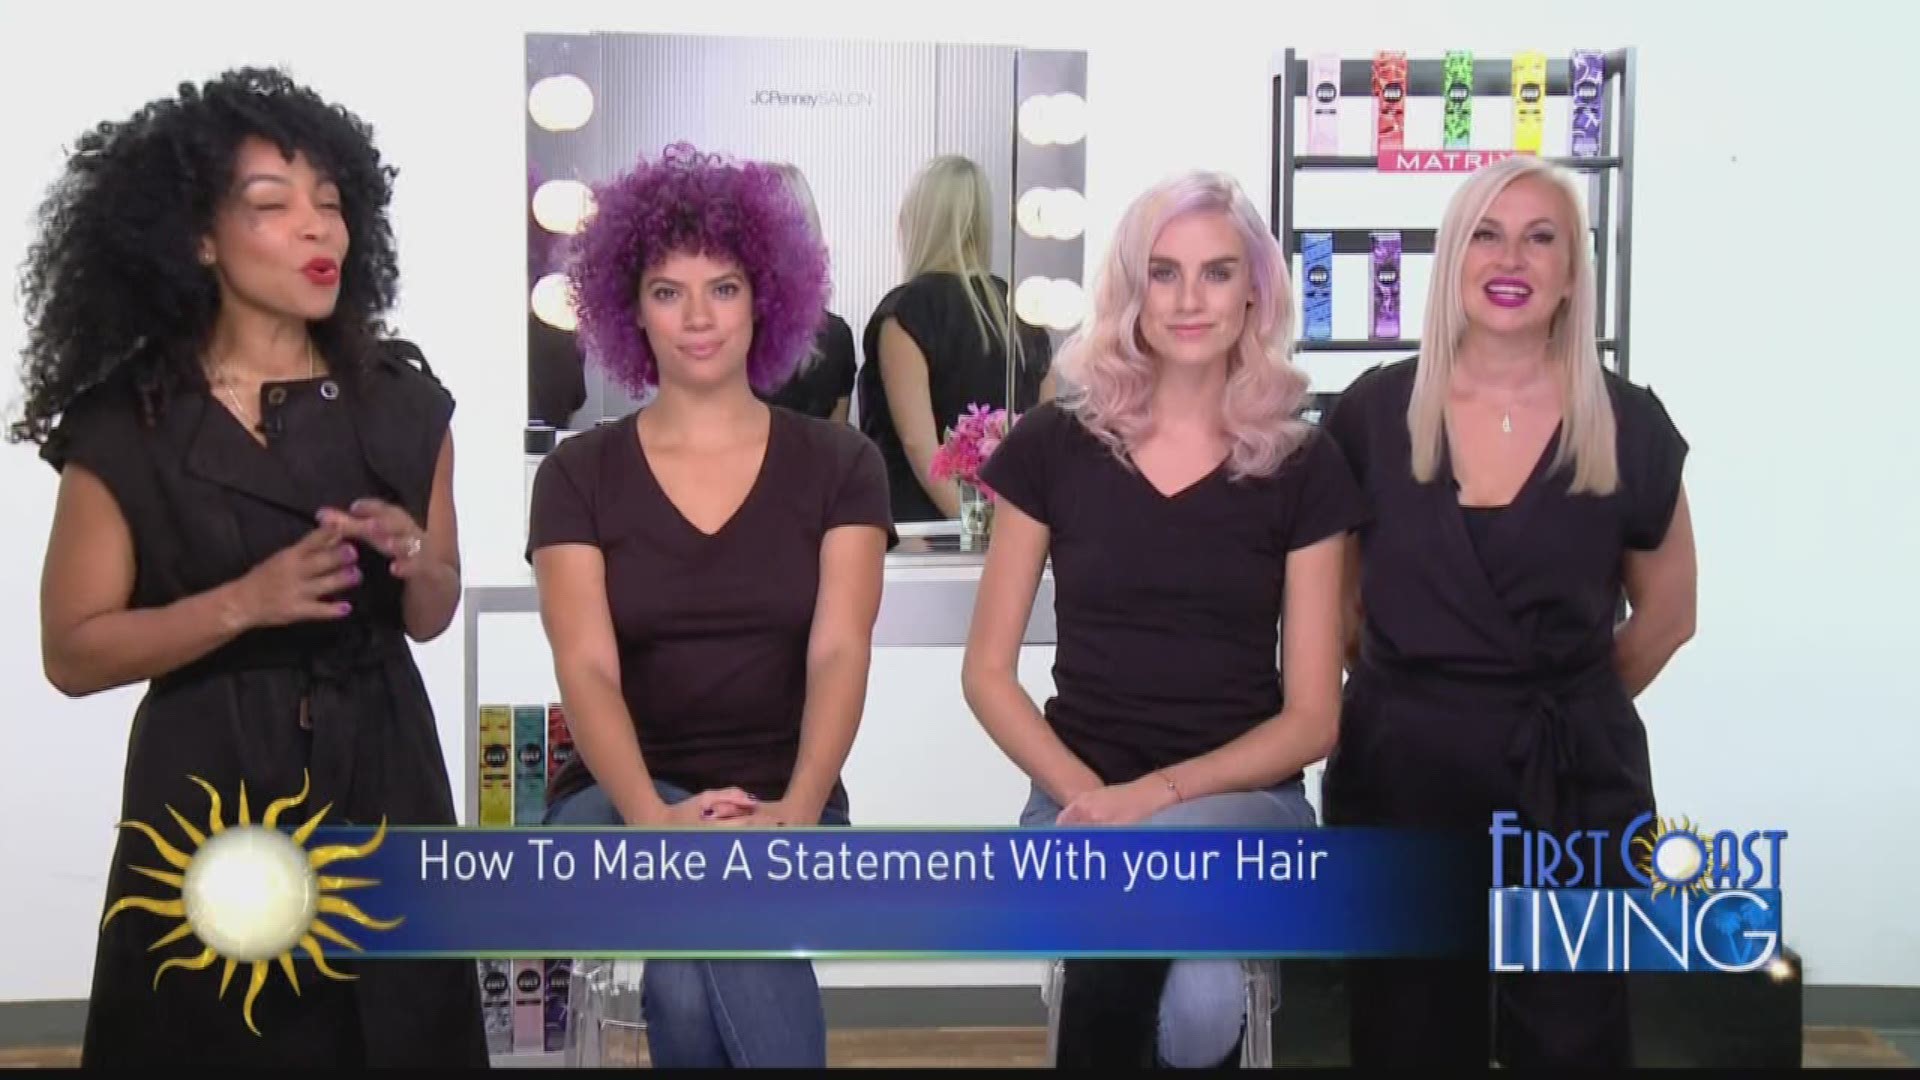 How To Make a Statement With Your Hair